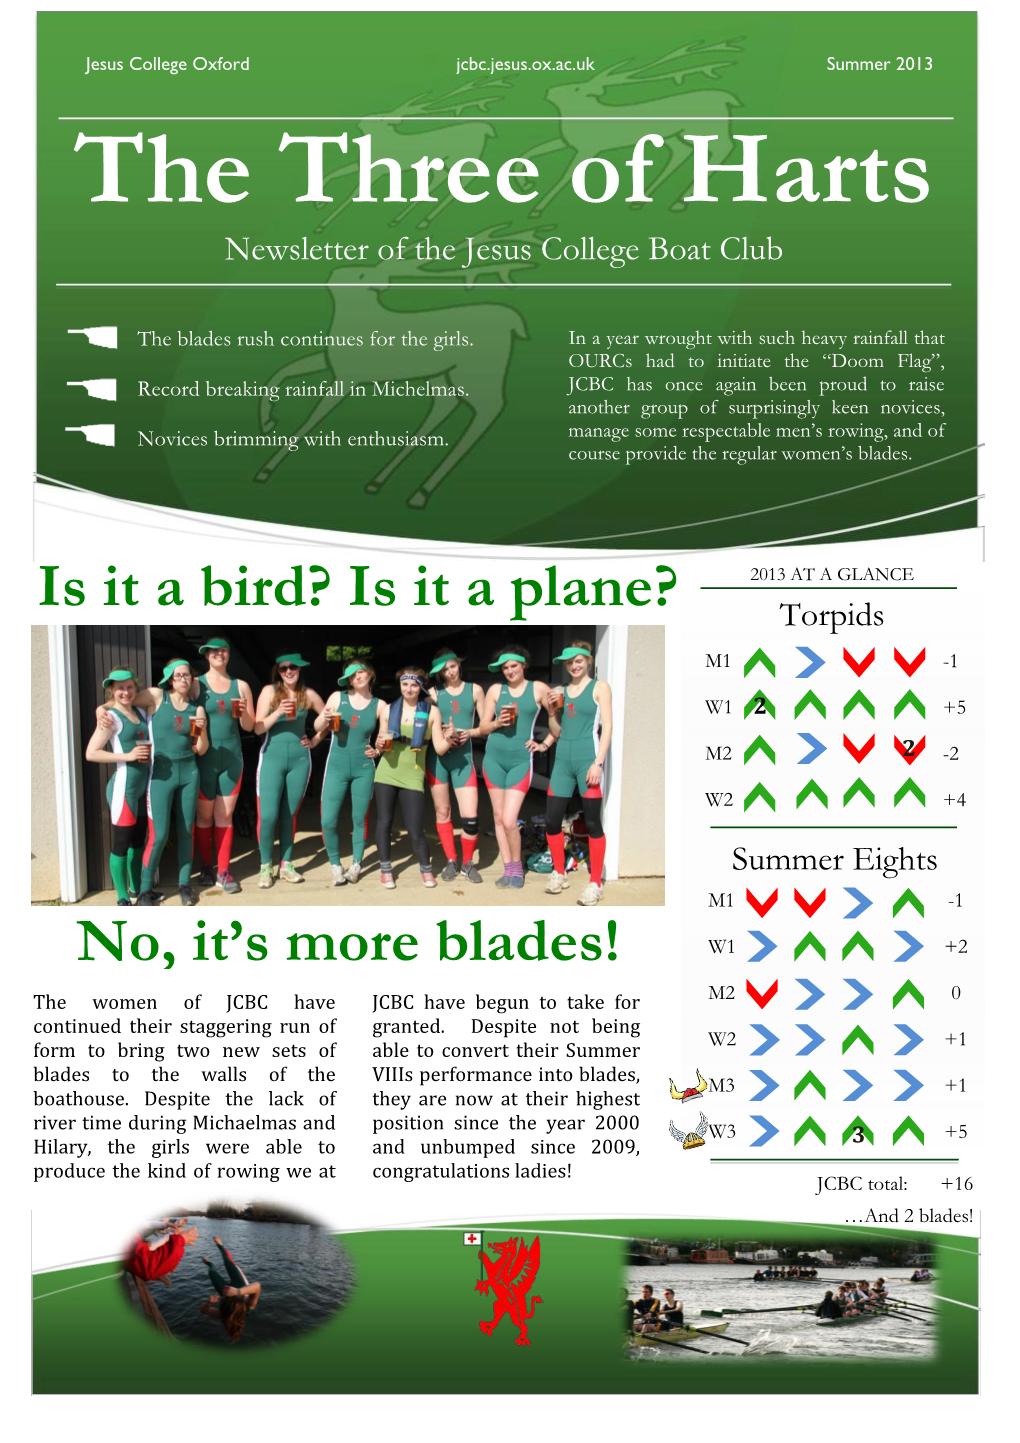 The Three of Harts Newsletter of the Jesus College Boat Club